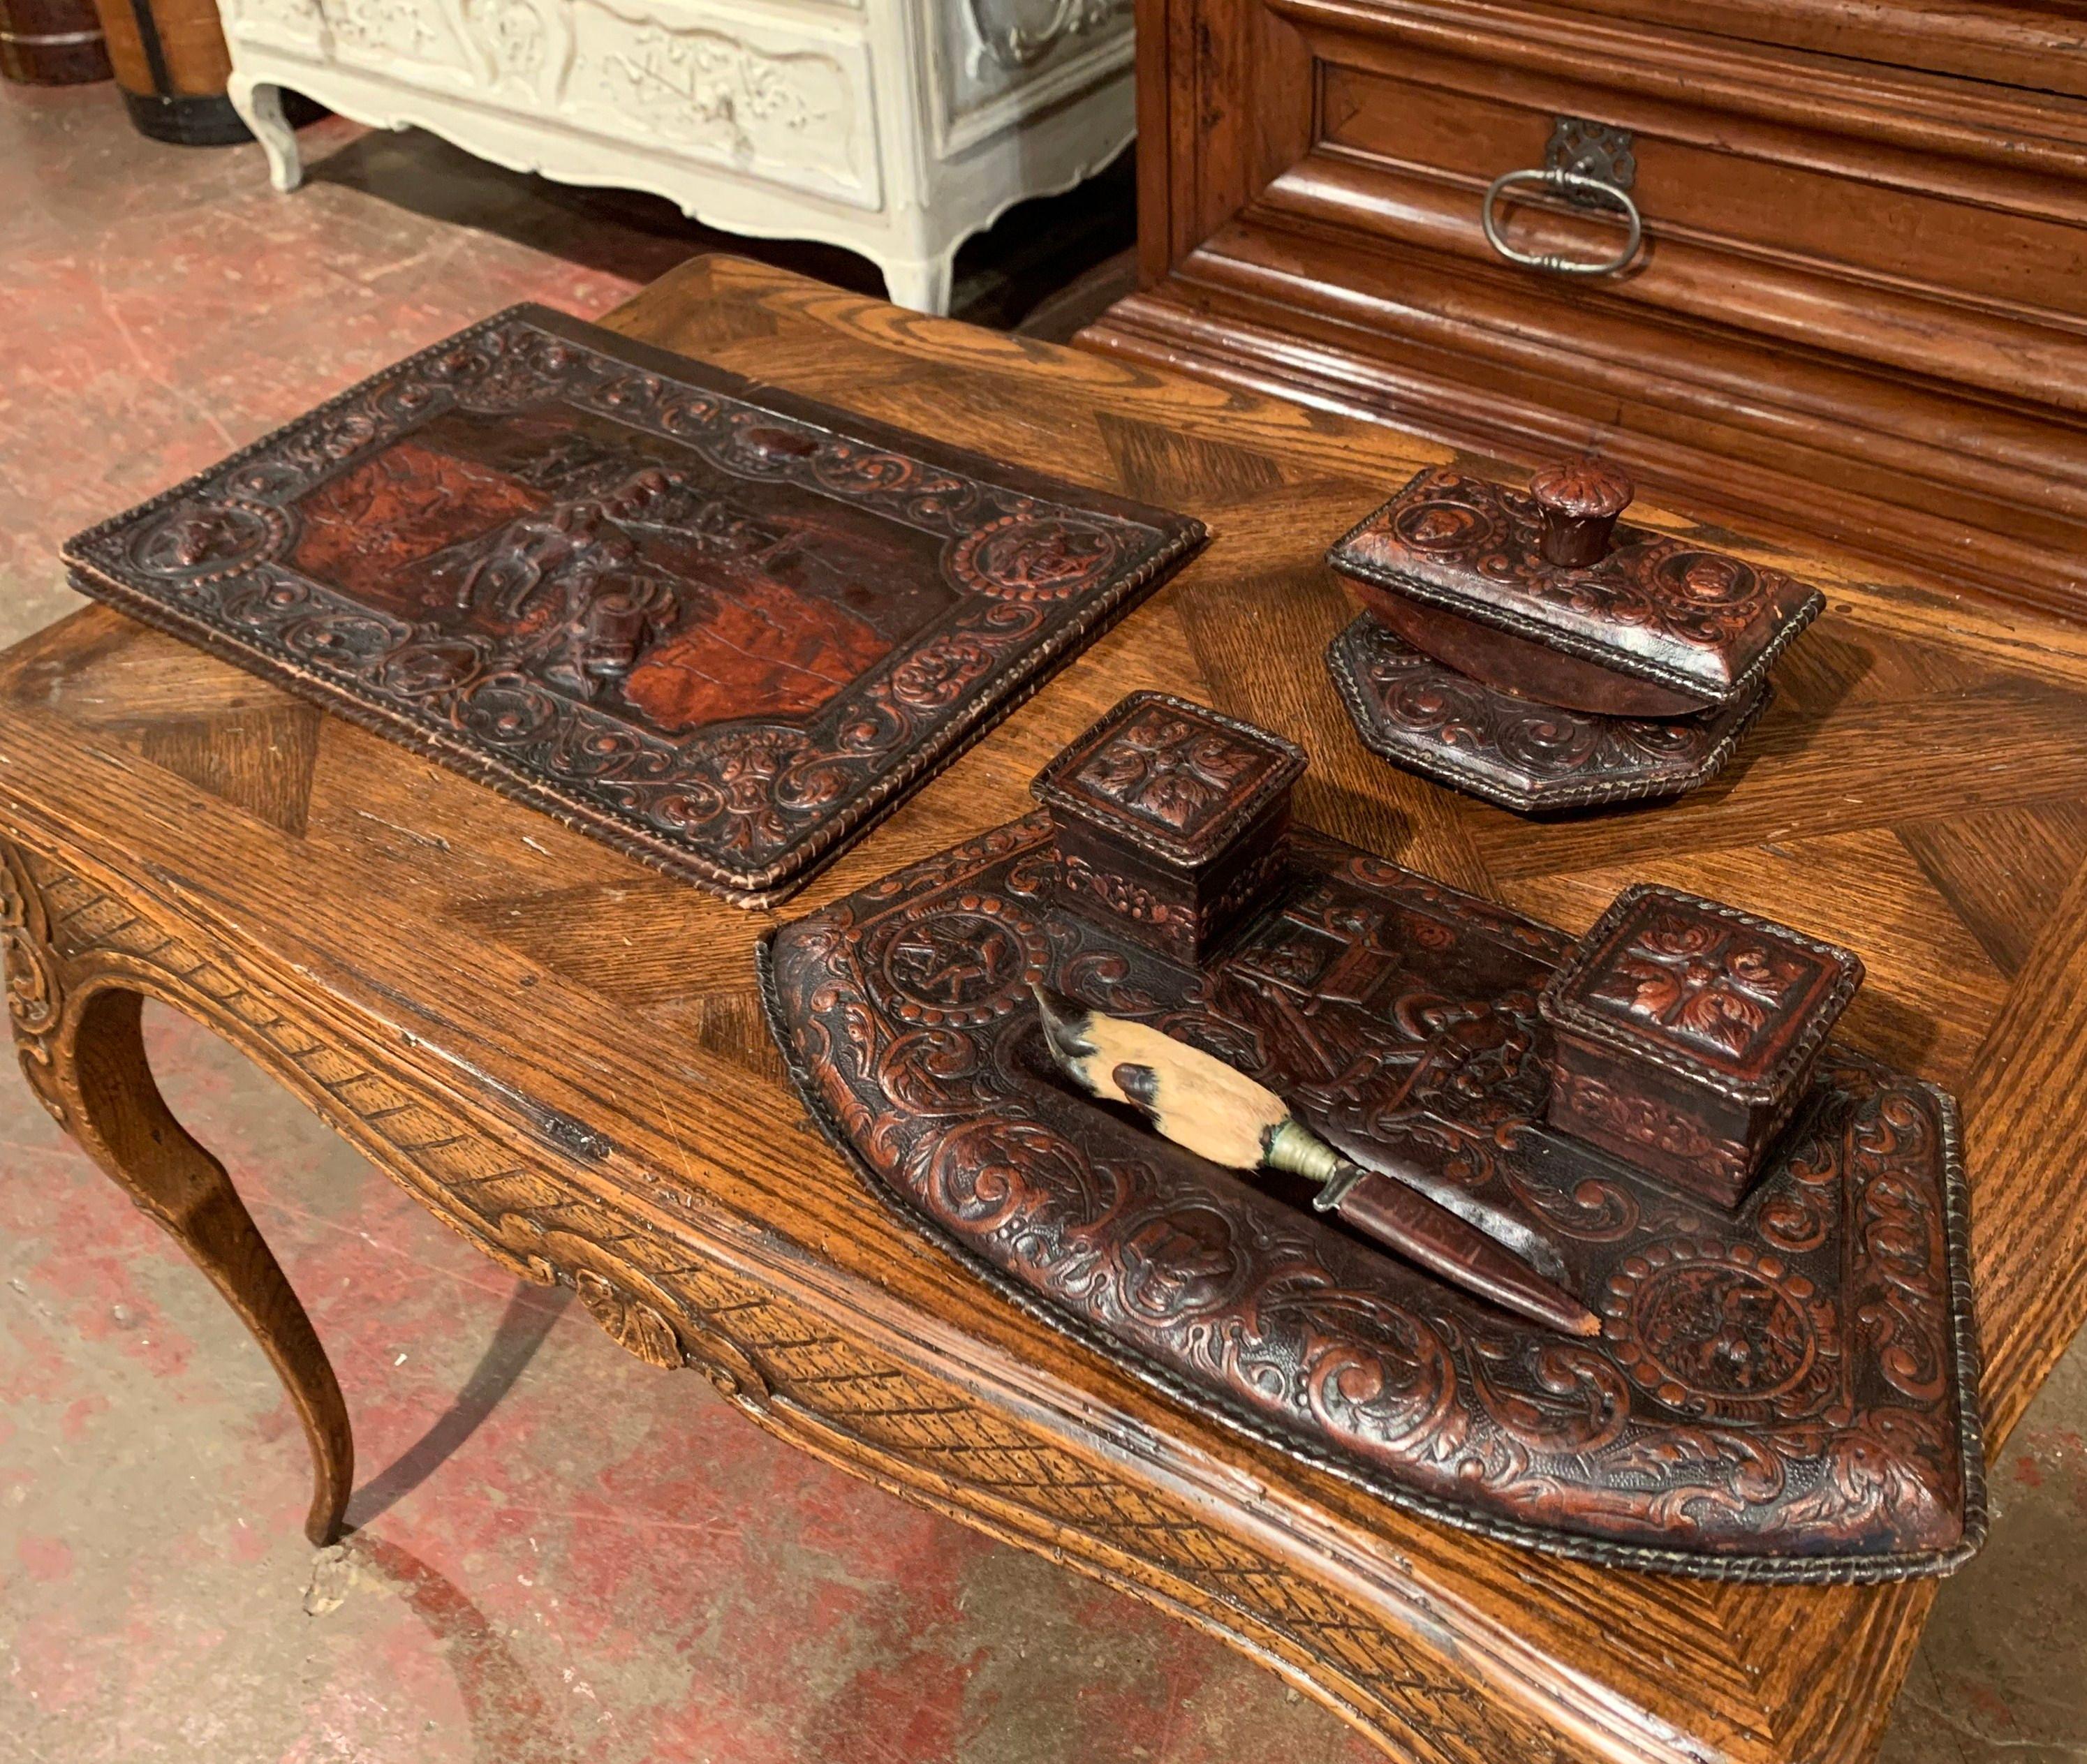 Repoussé 19th Century French Gothic Embossed Leather Five-Piece Desk Set